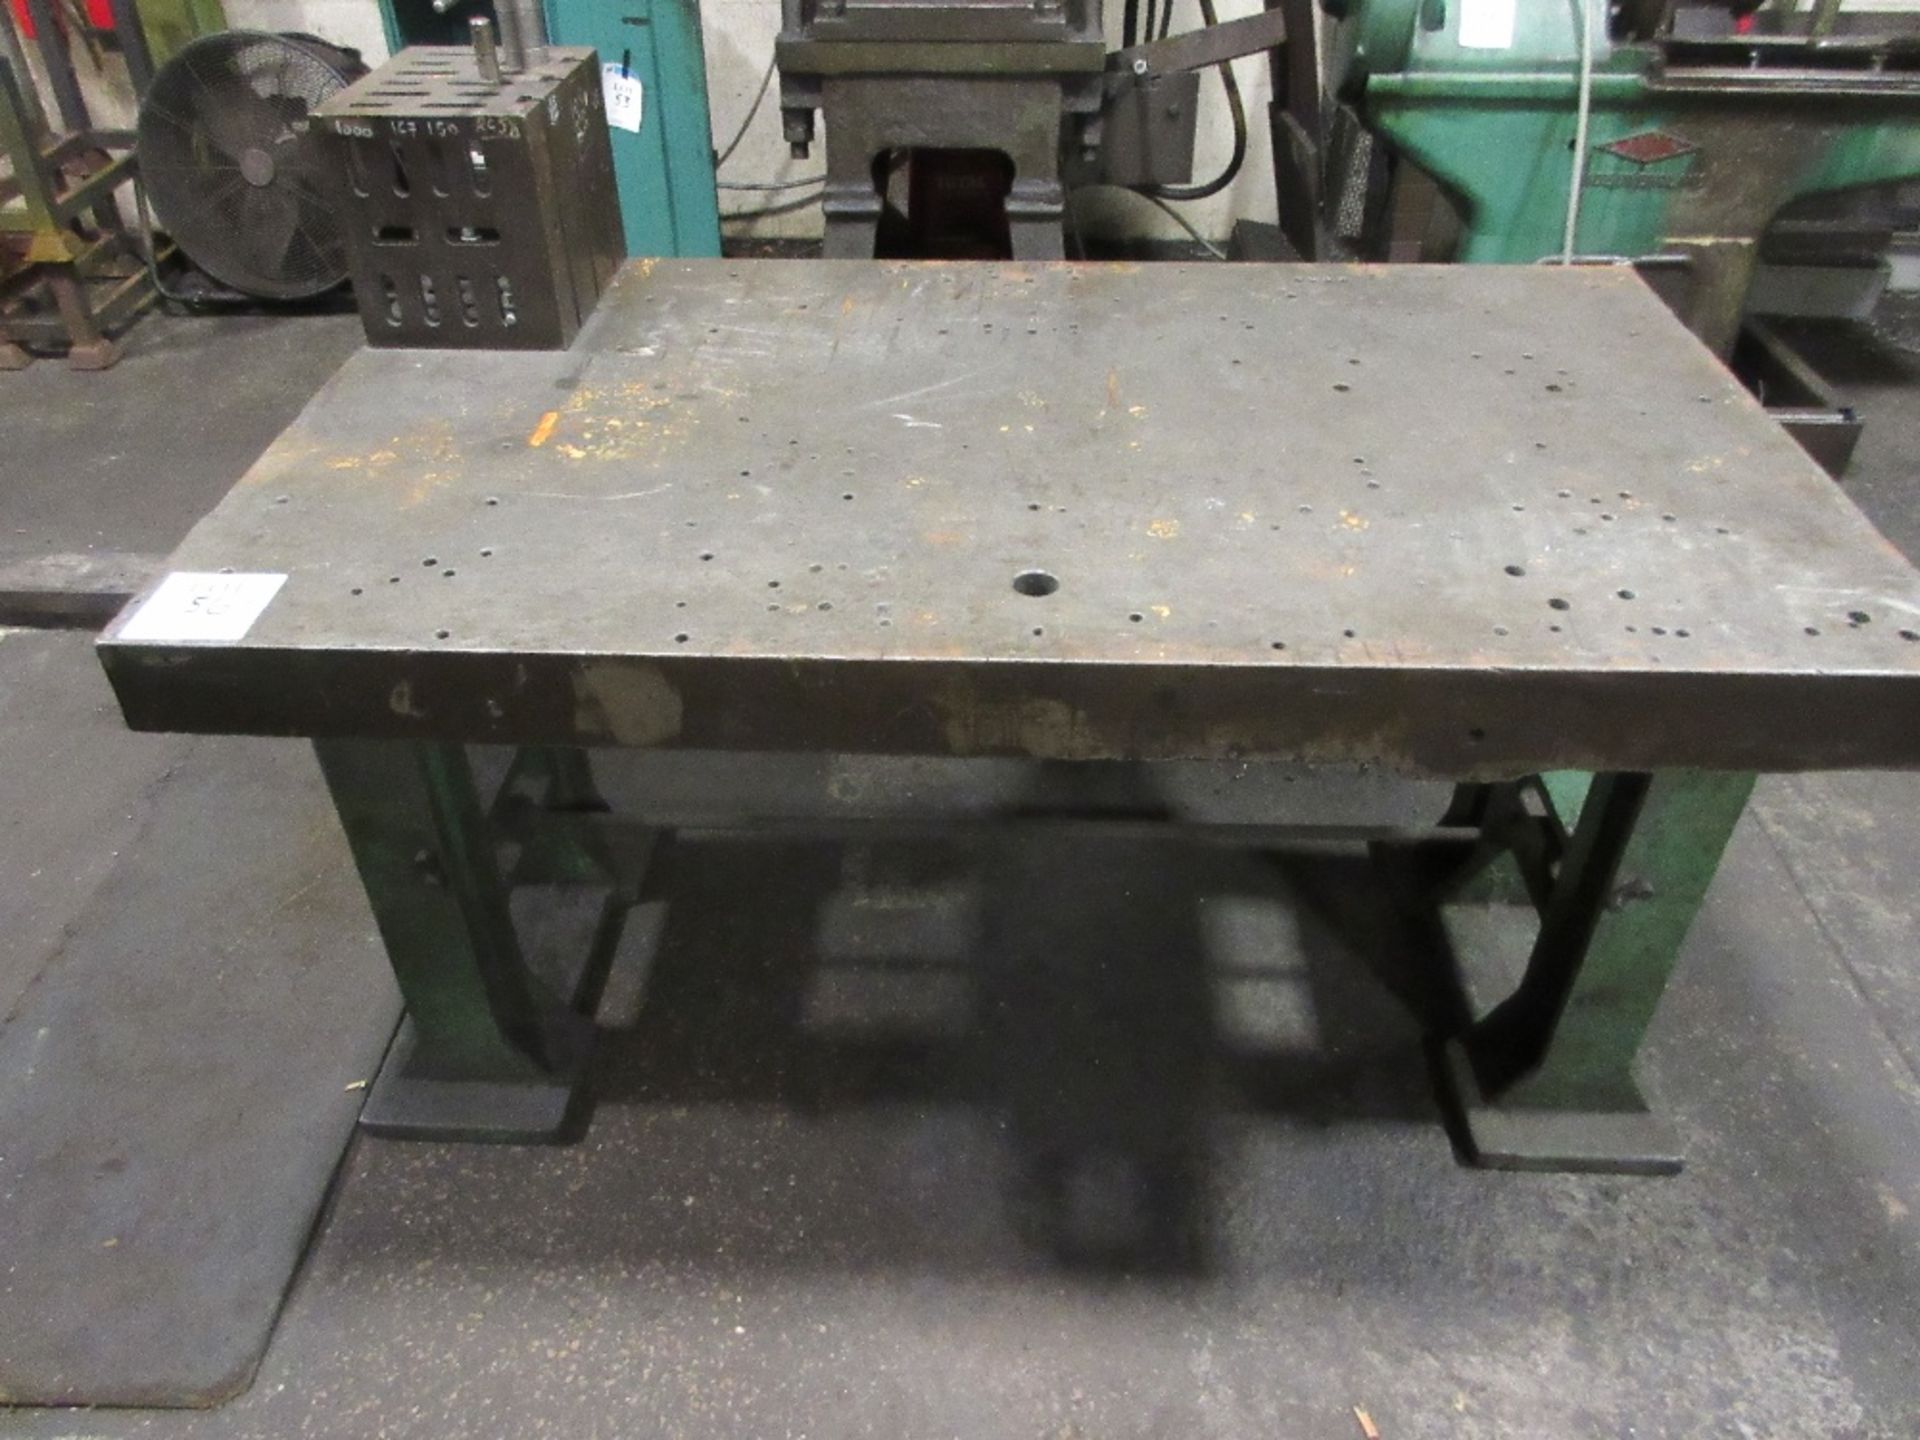 Surface table 4' 6" x 4' approx complete with engineer's block. A Risk Assessment and Method